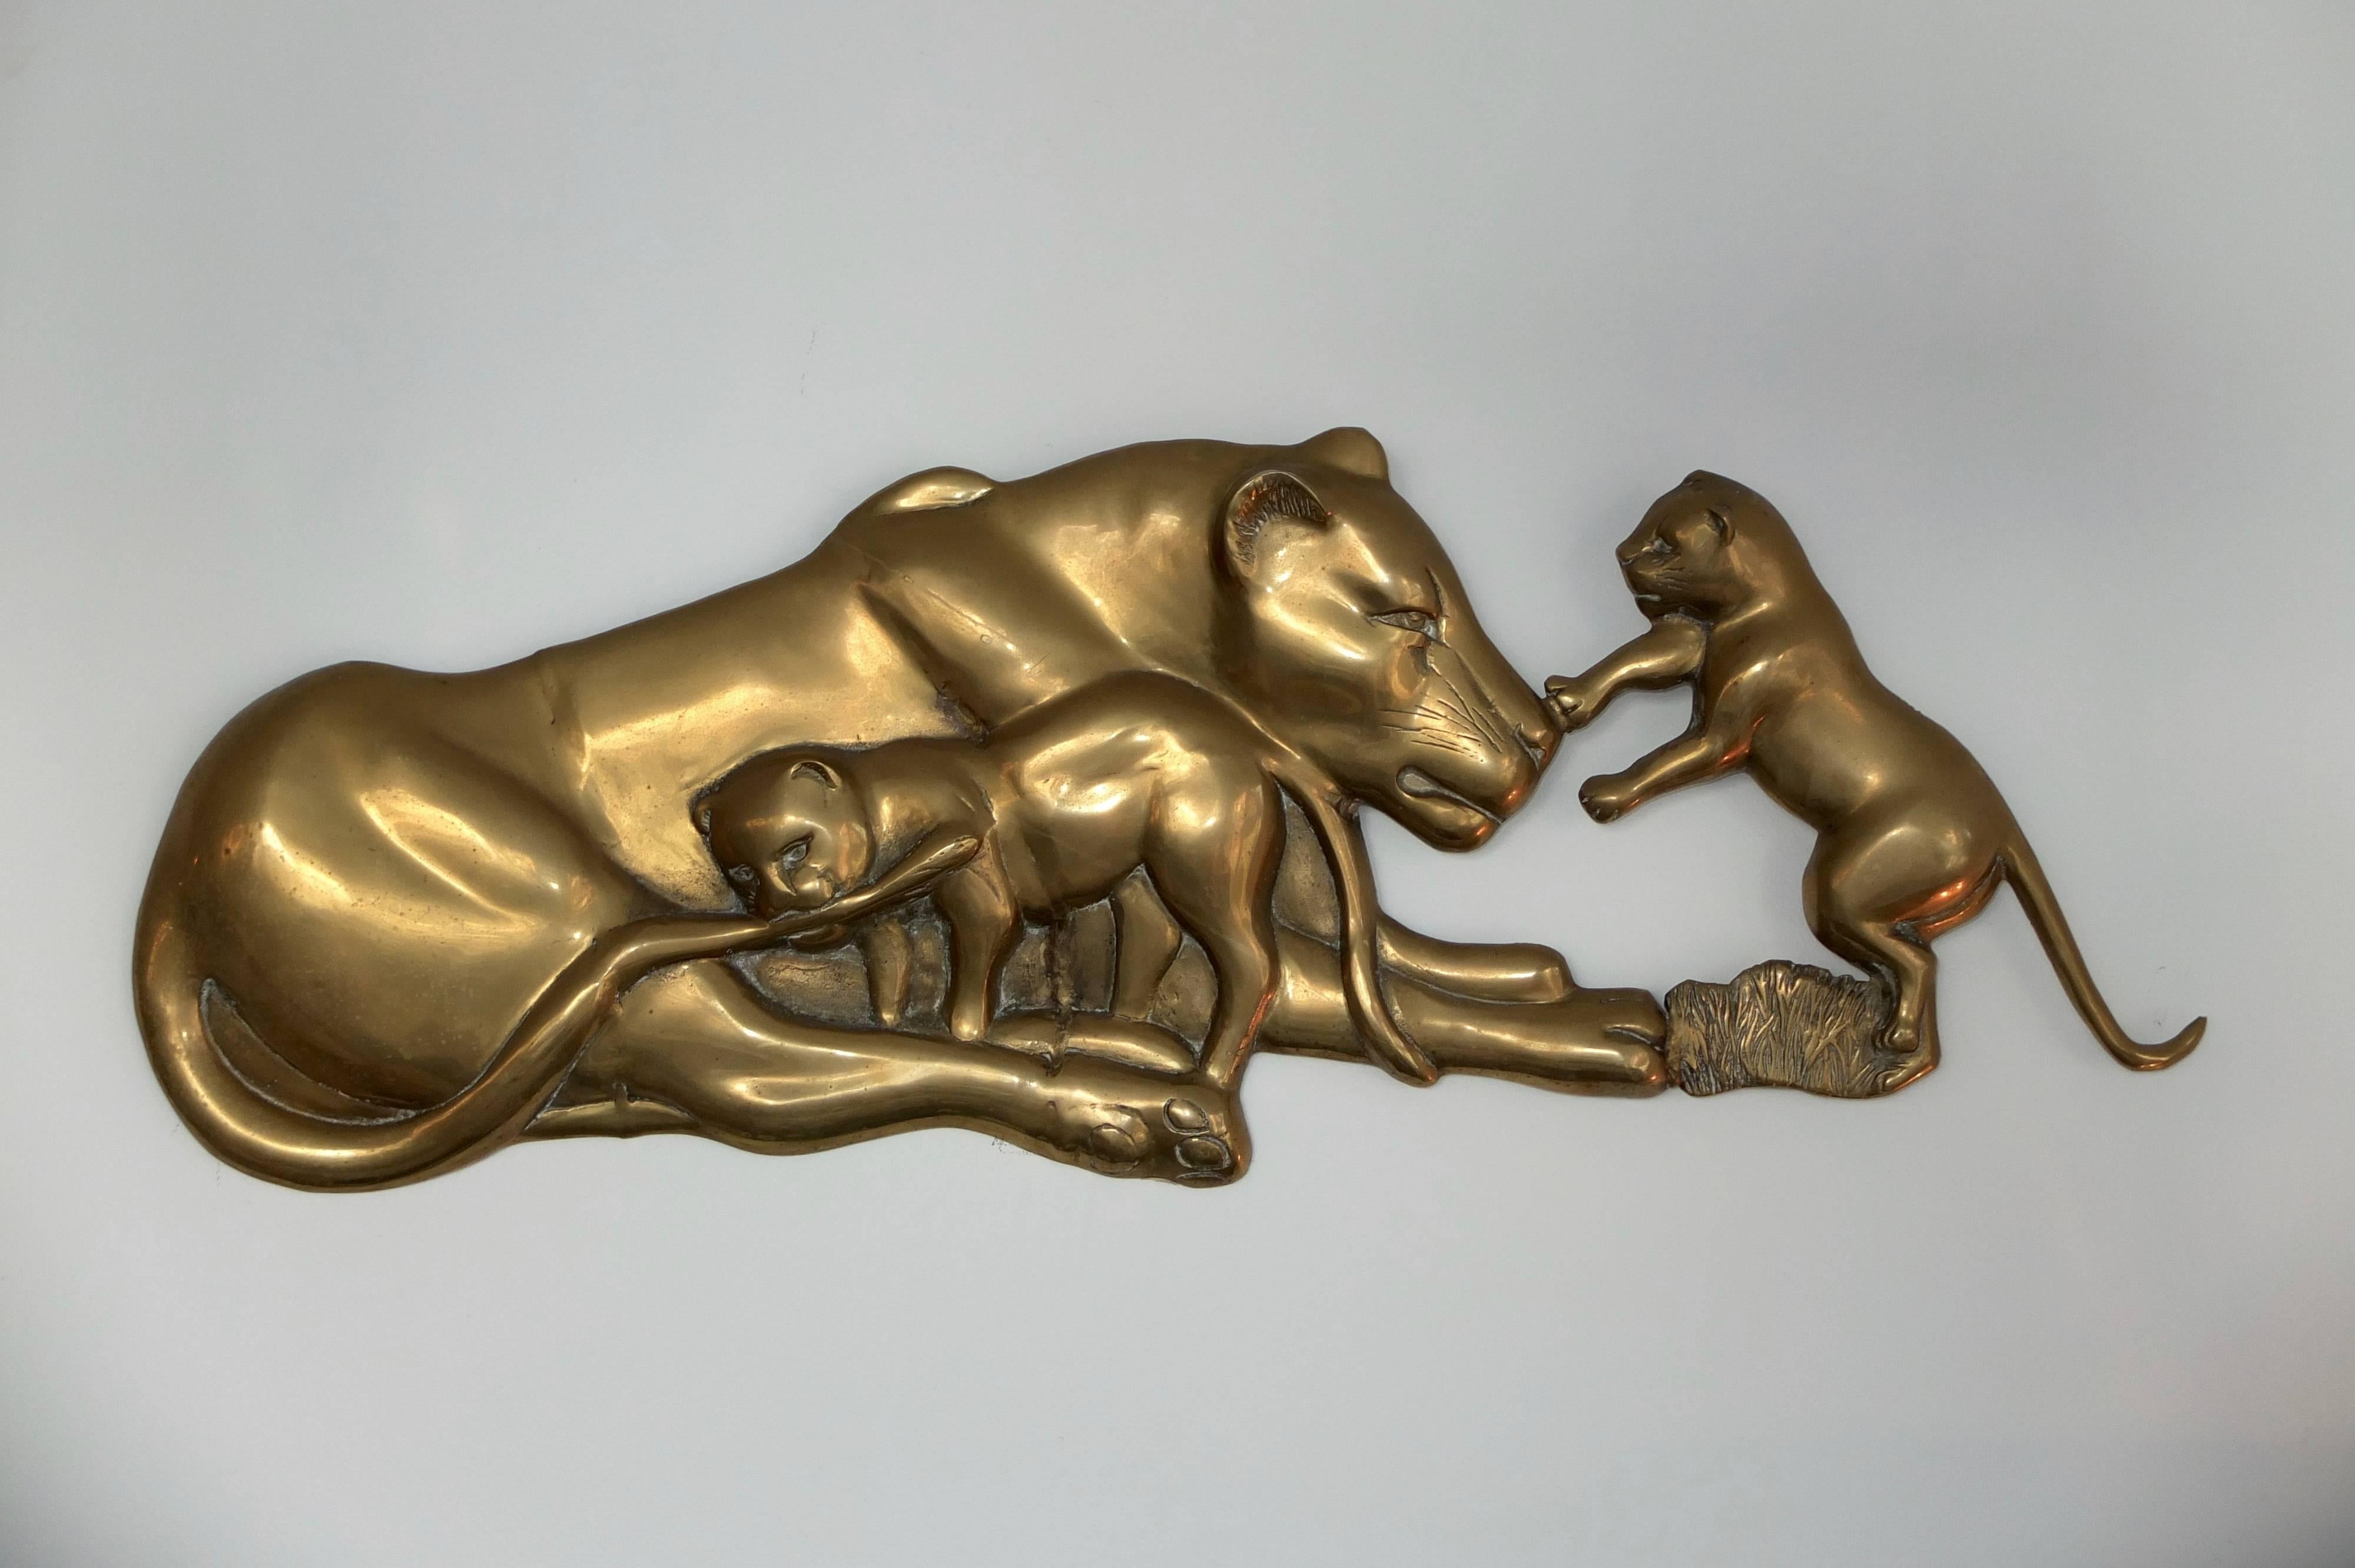 Sculptural solid brass cast relief of a lioness with her two young playful cubs.  Fitted with a chain on the back for hanging on a wall.  Original vintage patina.